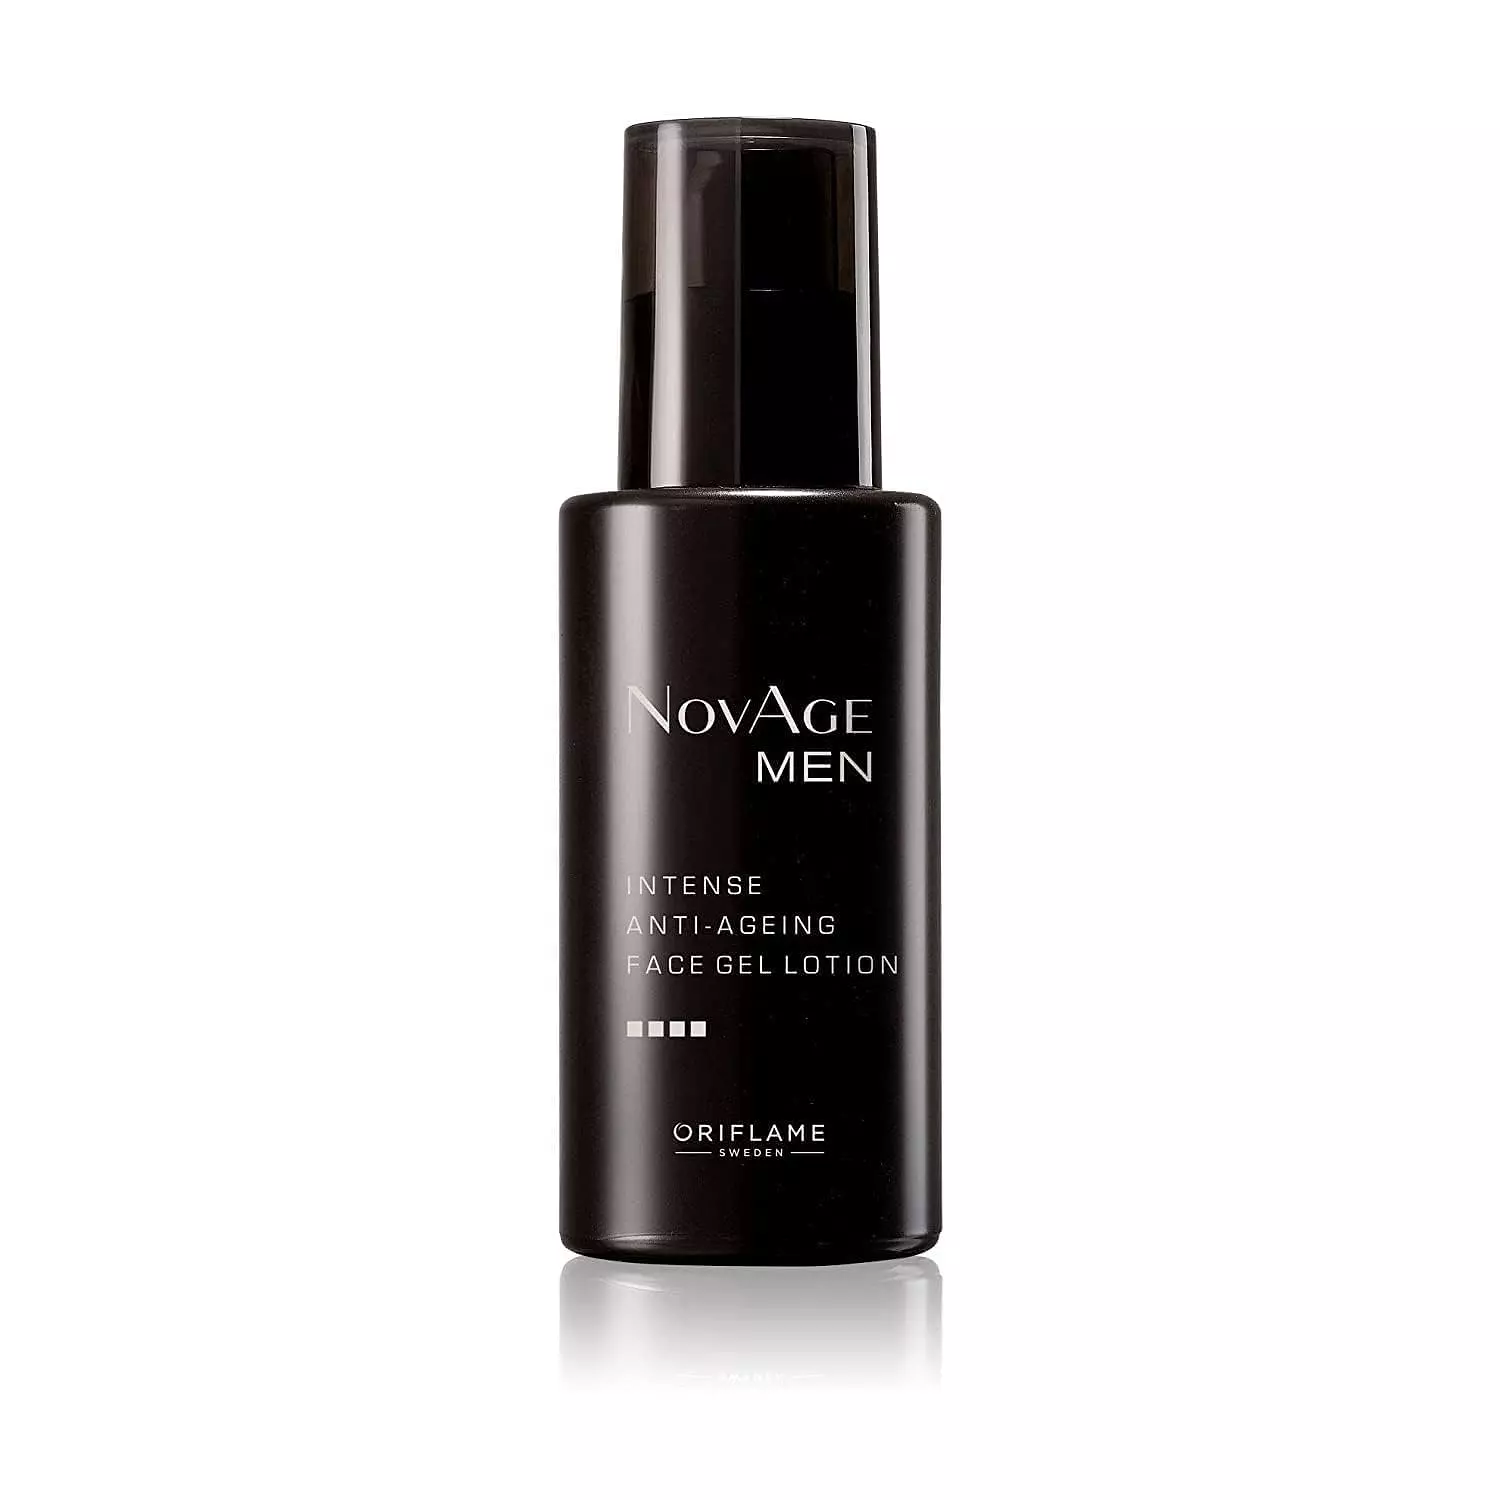 Novage Men Intense Anti-Ageing Face Gel Lotion   hover image